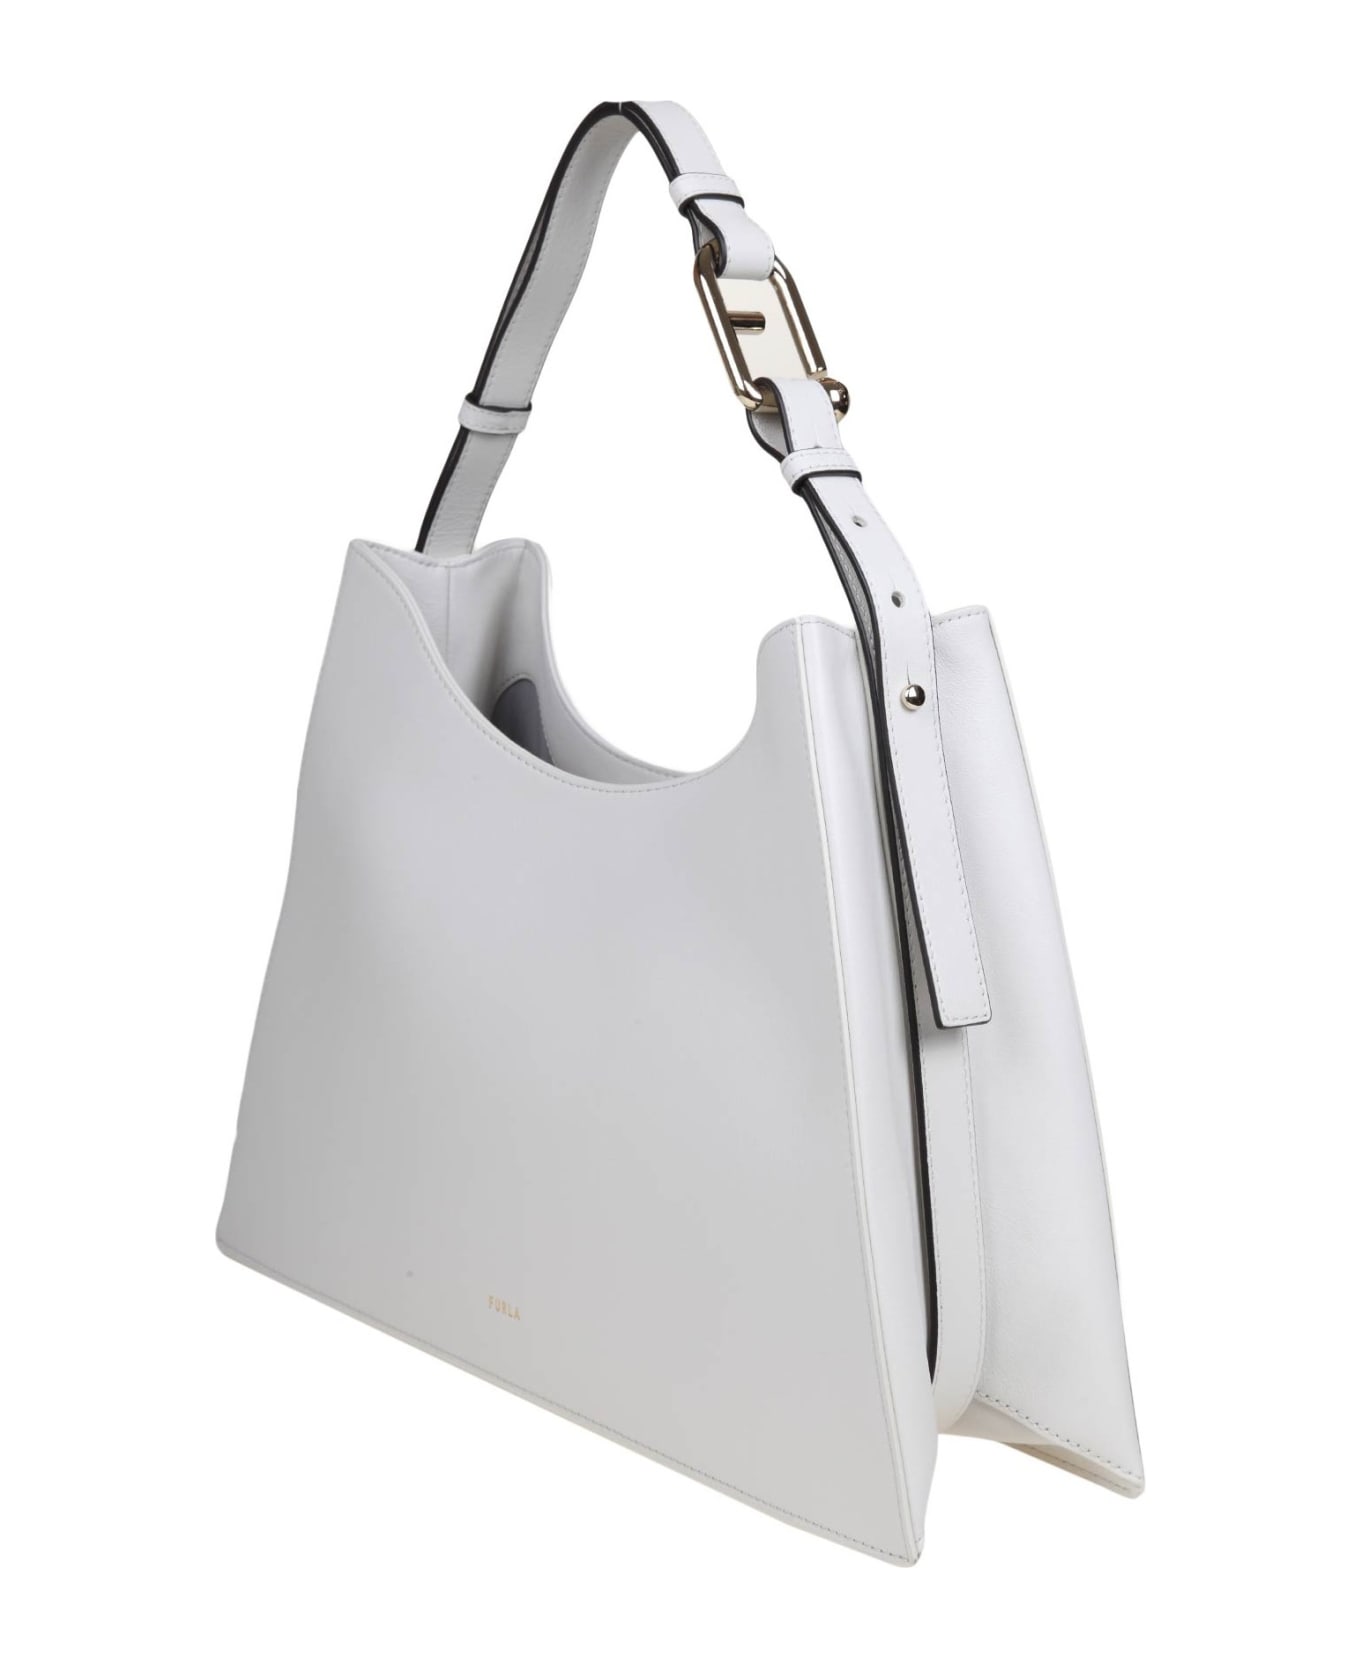 Furla Nuvola Shoulder Bag In Marshmallow Color Leather - Marshmallow